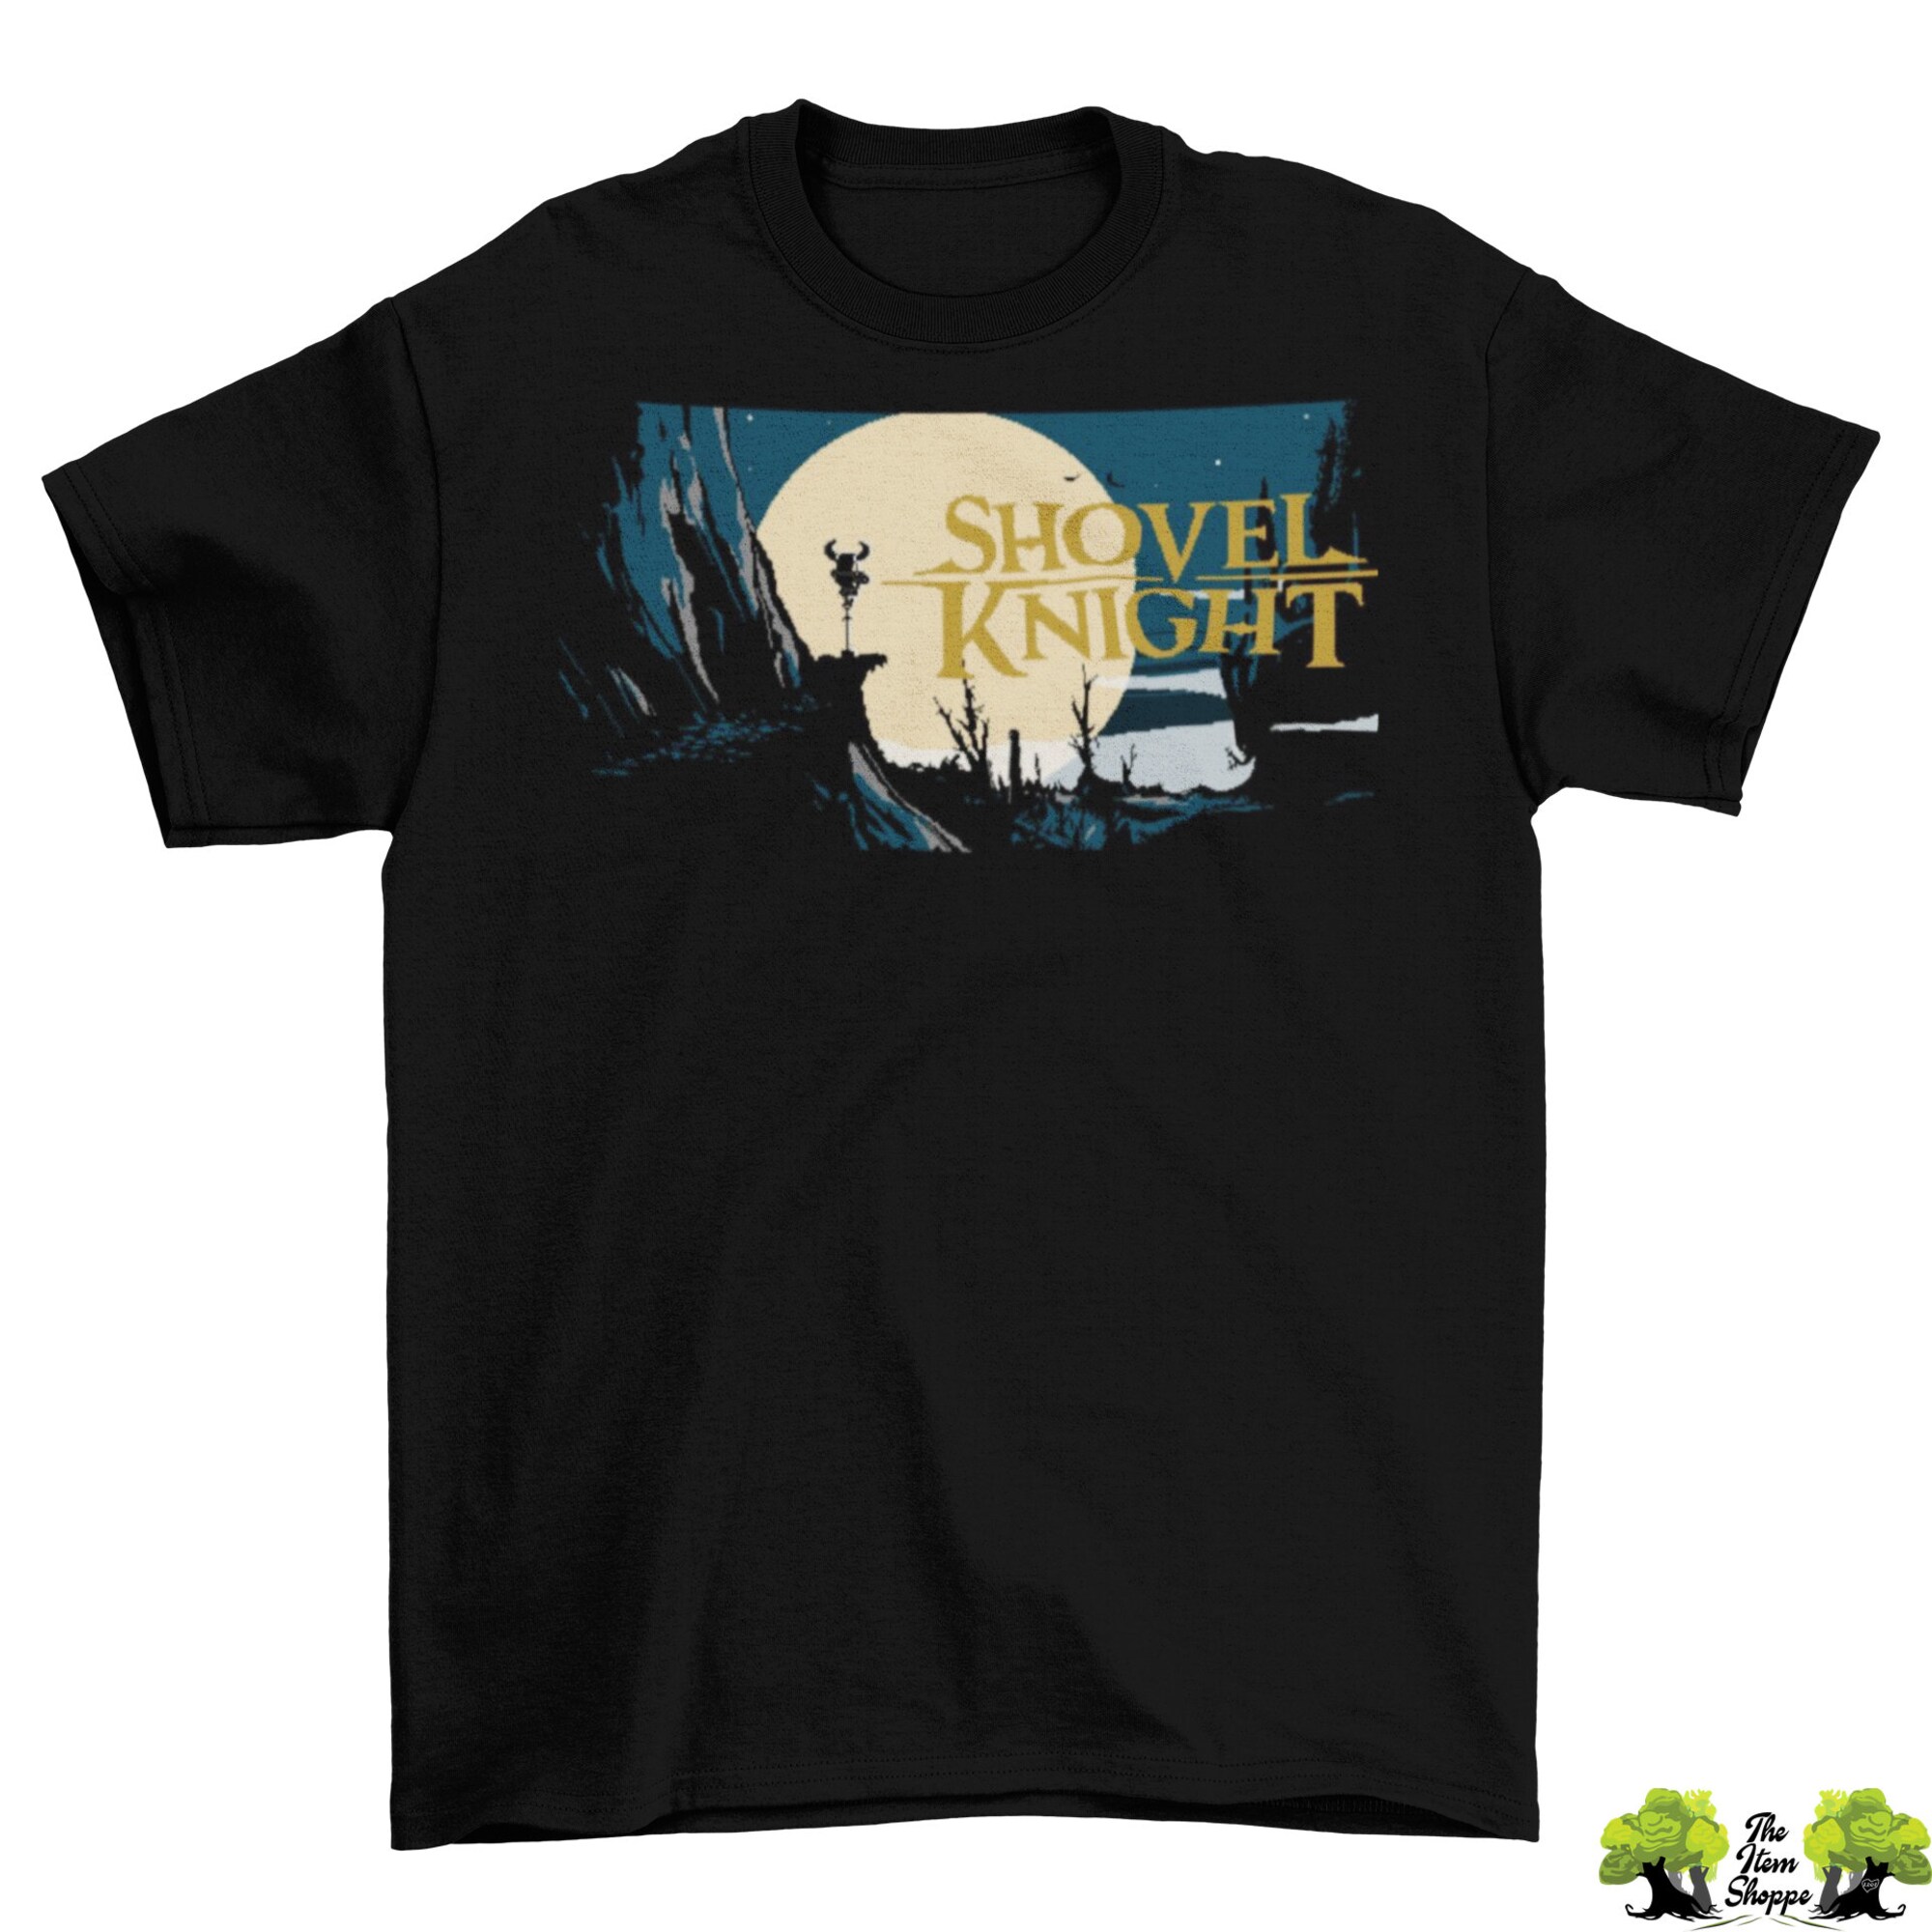 Shovel Knight T-Shirt Unisex Adult Funny Sizes Video Game Indie Platformer New